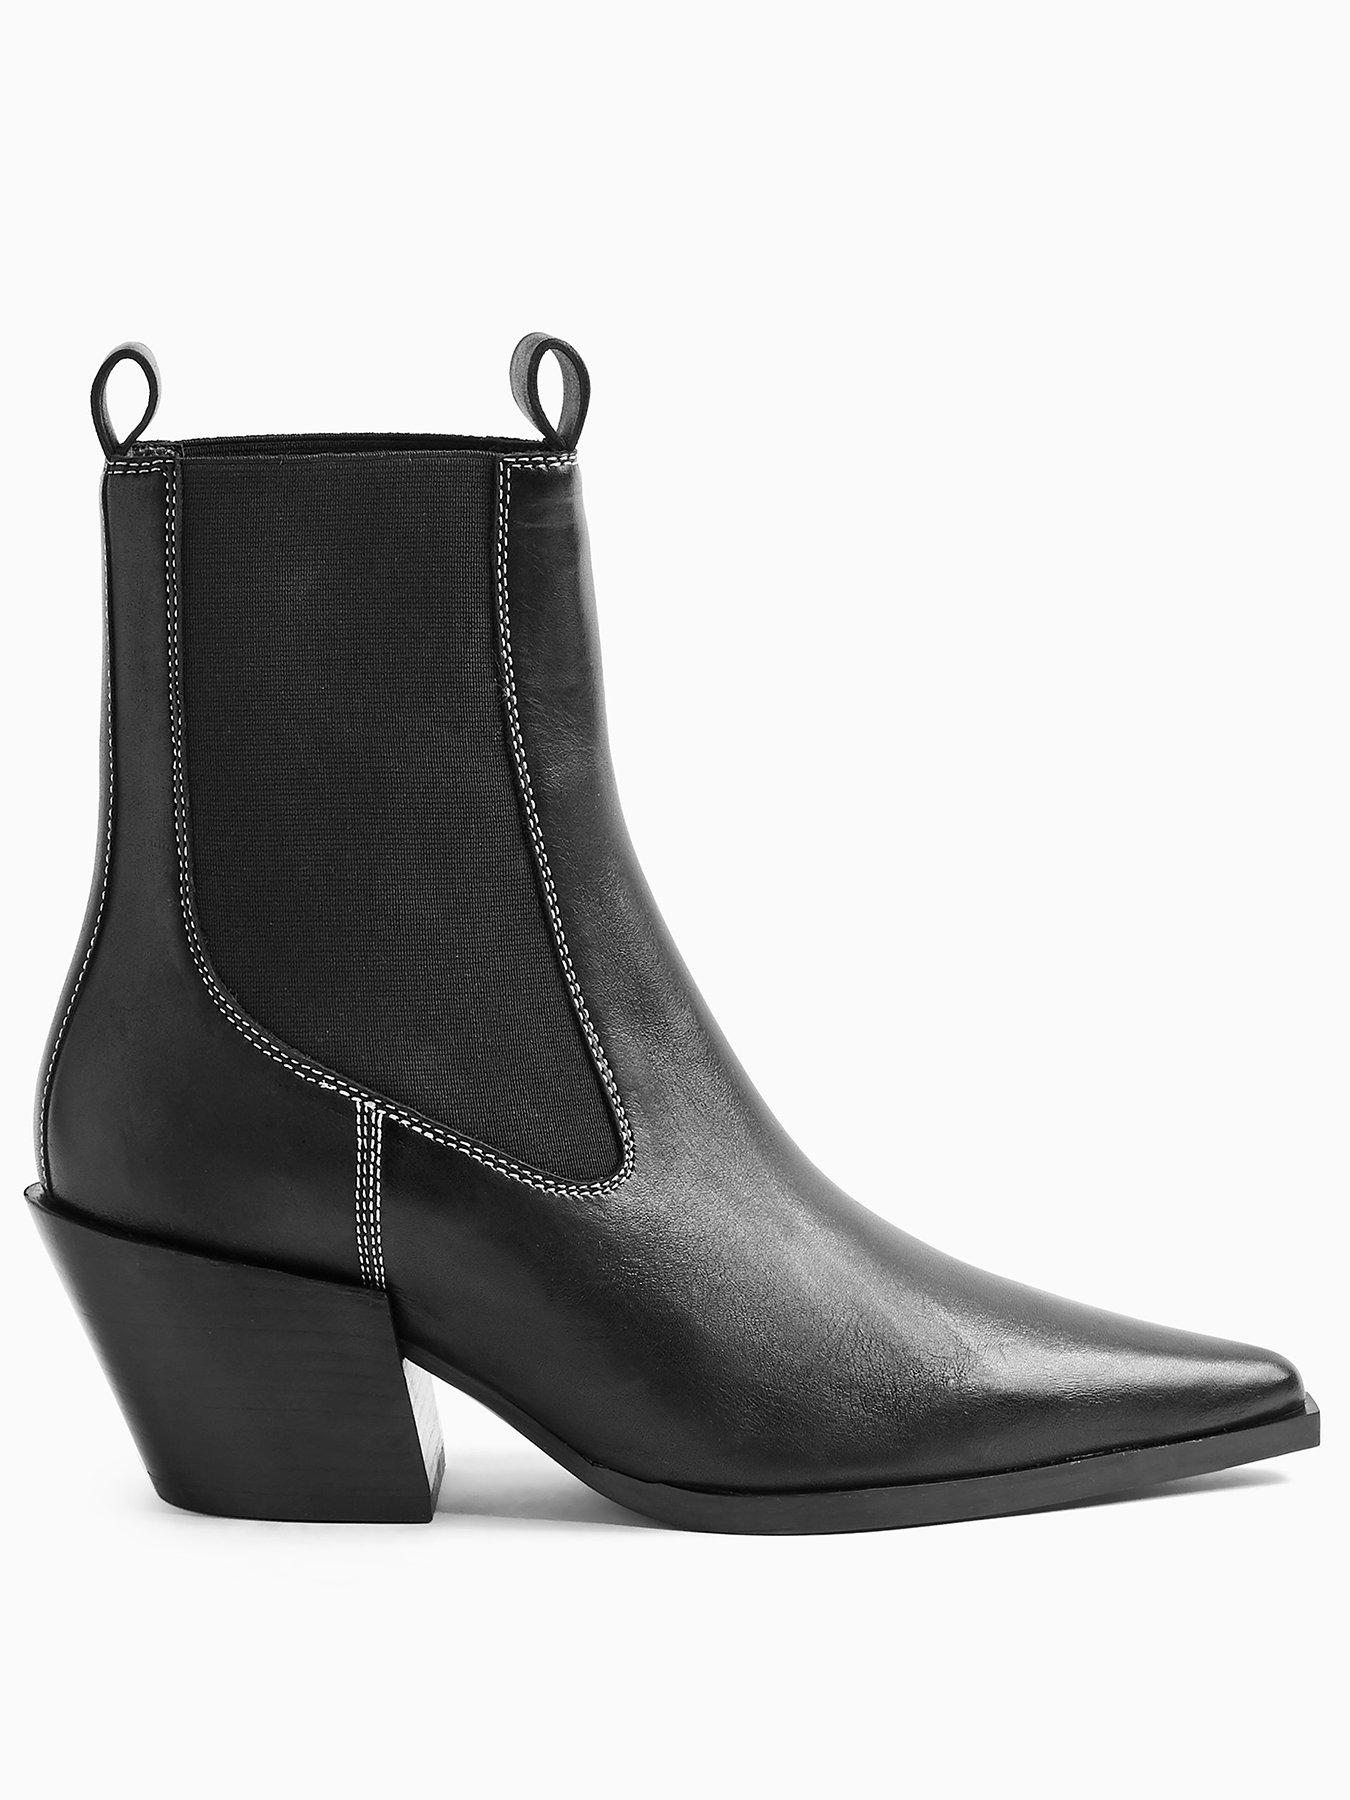 ankle boots ireland